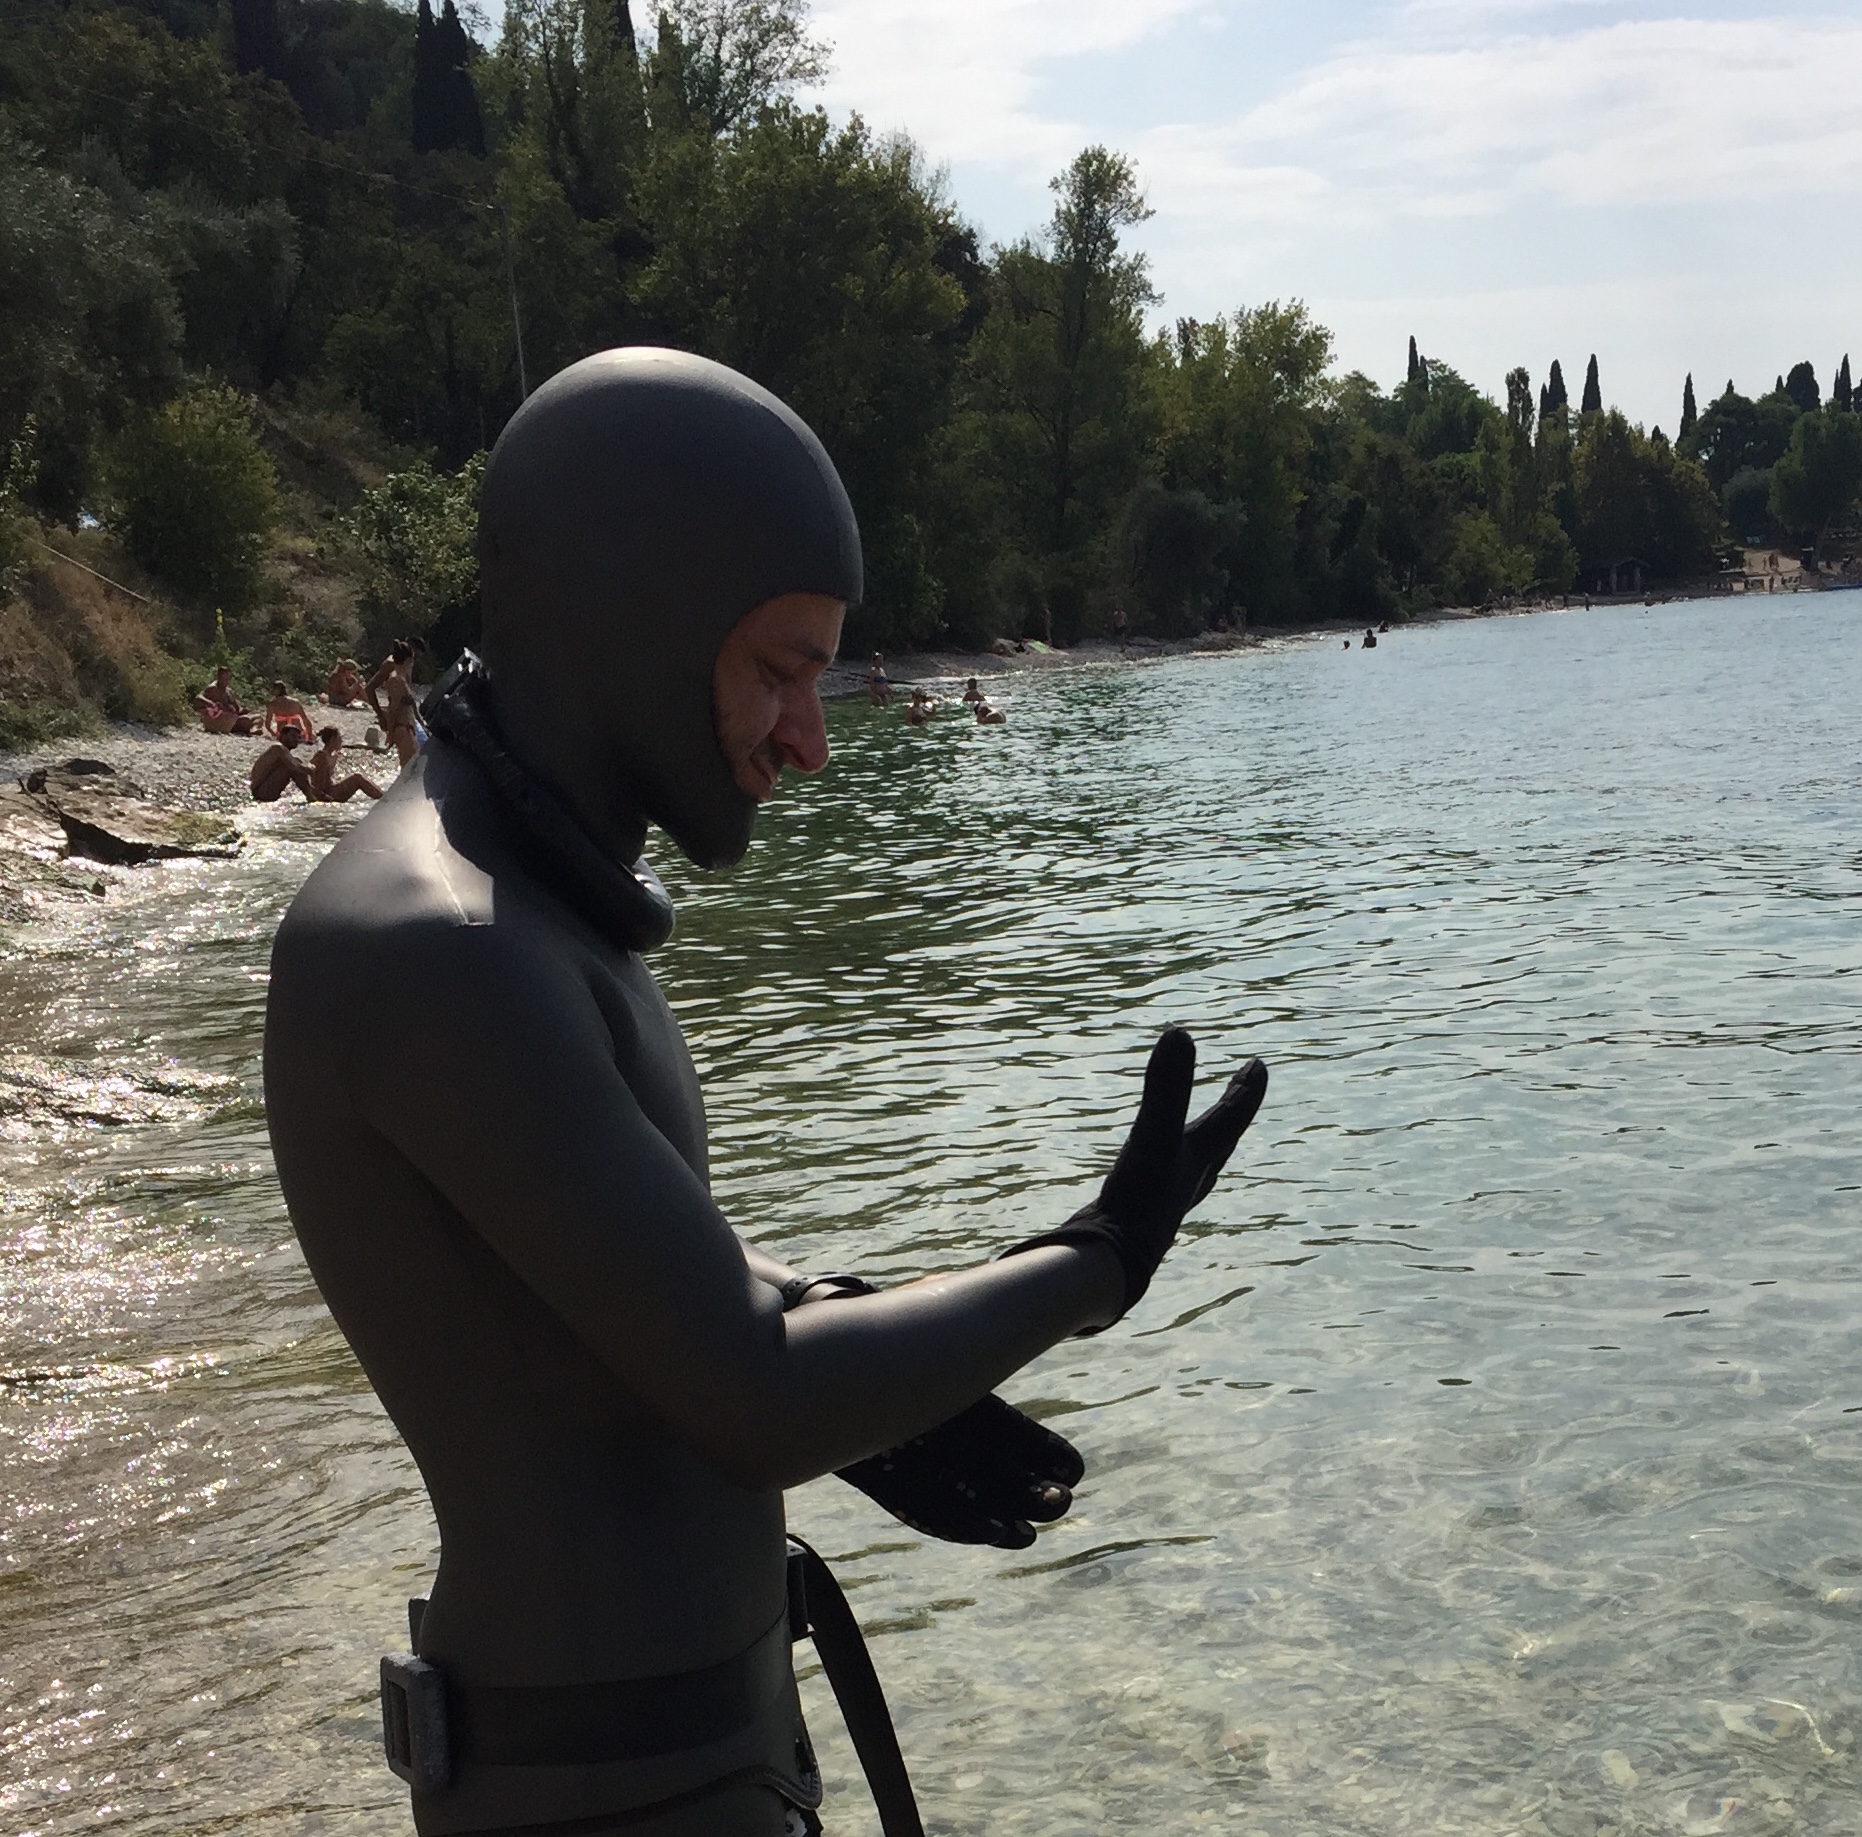 Moving Limits freediving session in Como Lake